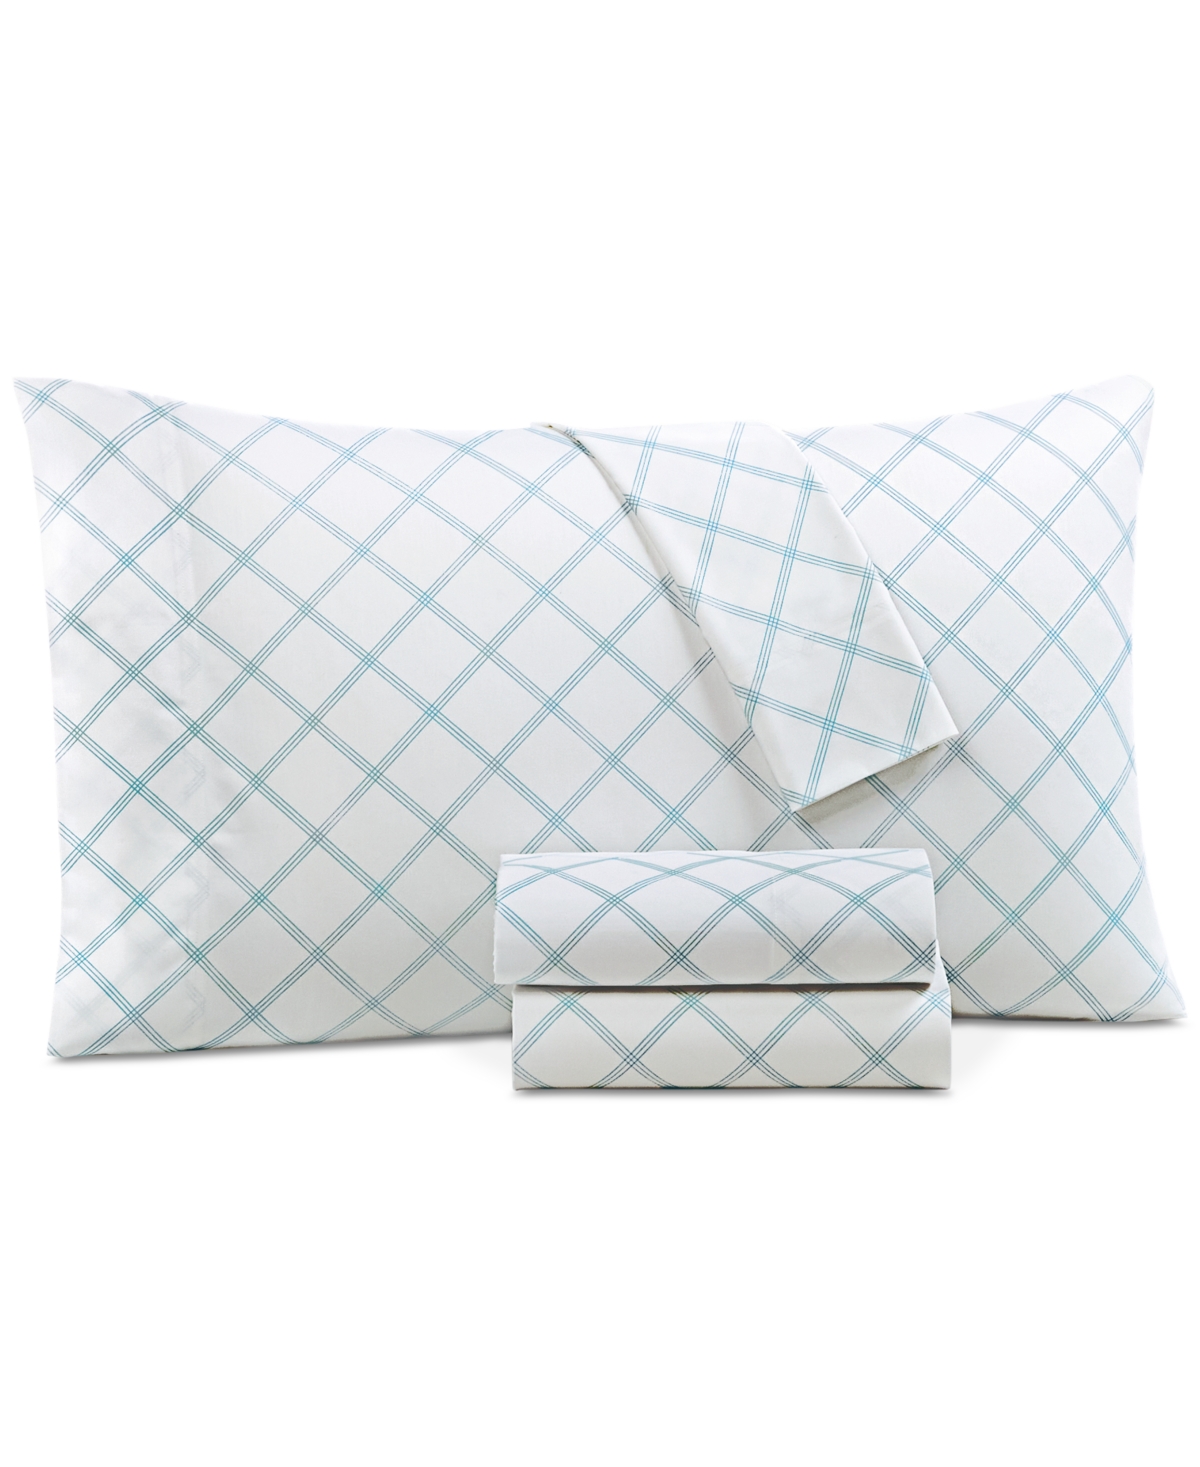 Charter Club Damask Designs 550 Thread Count Printed Cotton 4-pc. Sheet Set, California King, Created For Macy's In Windowpane Blue